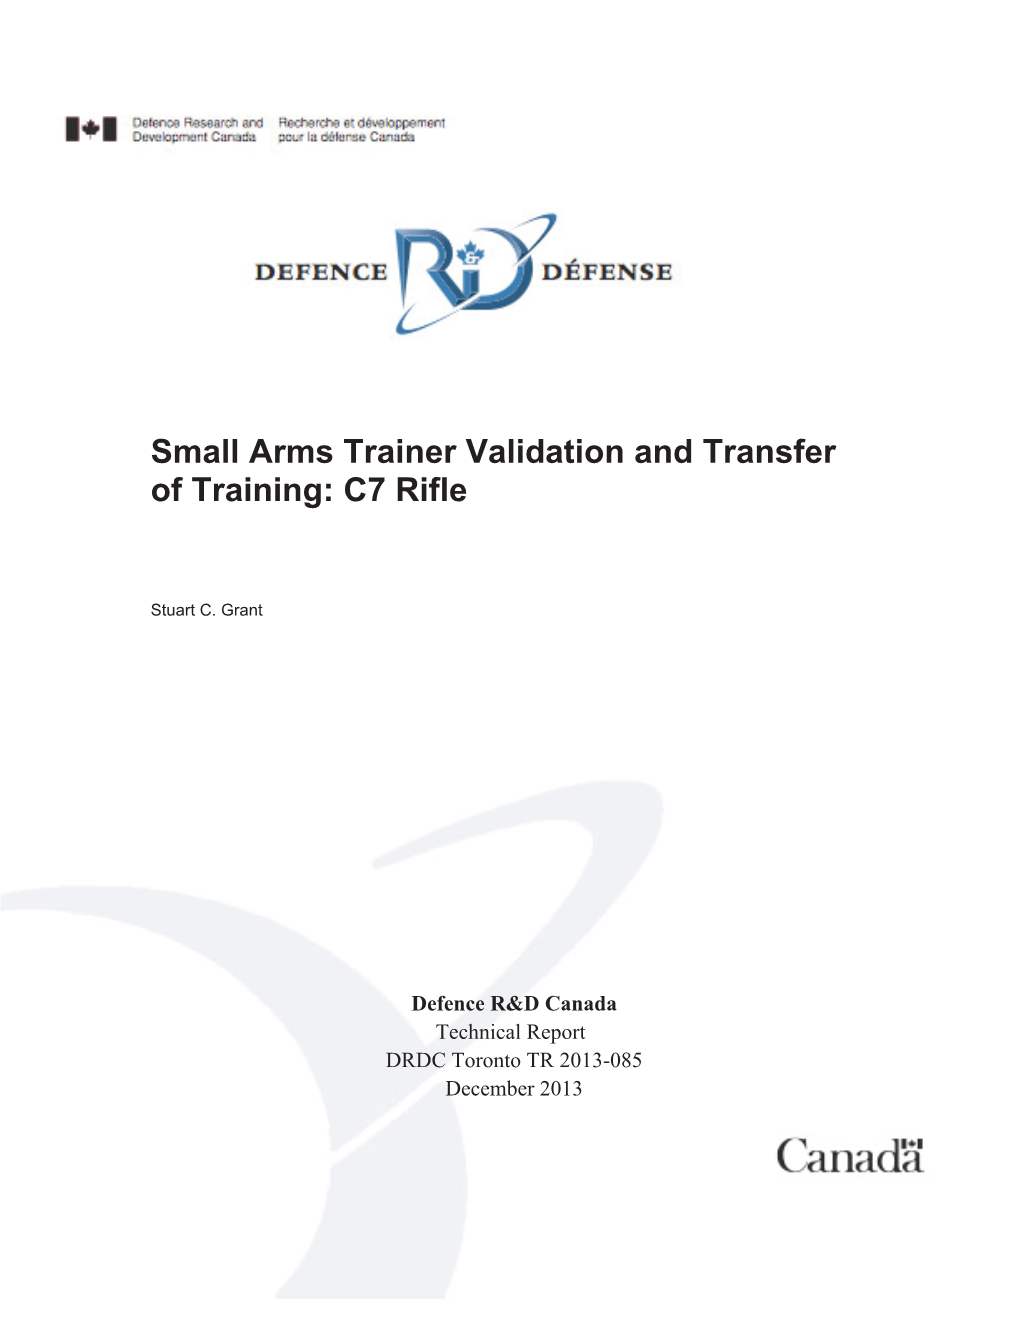 Small Arms Trainer Validation and Transfer of Training: C7 Rifle